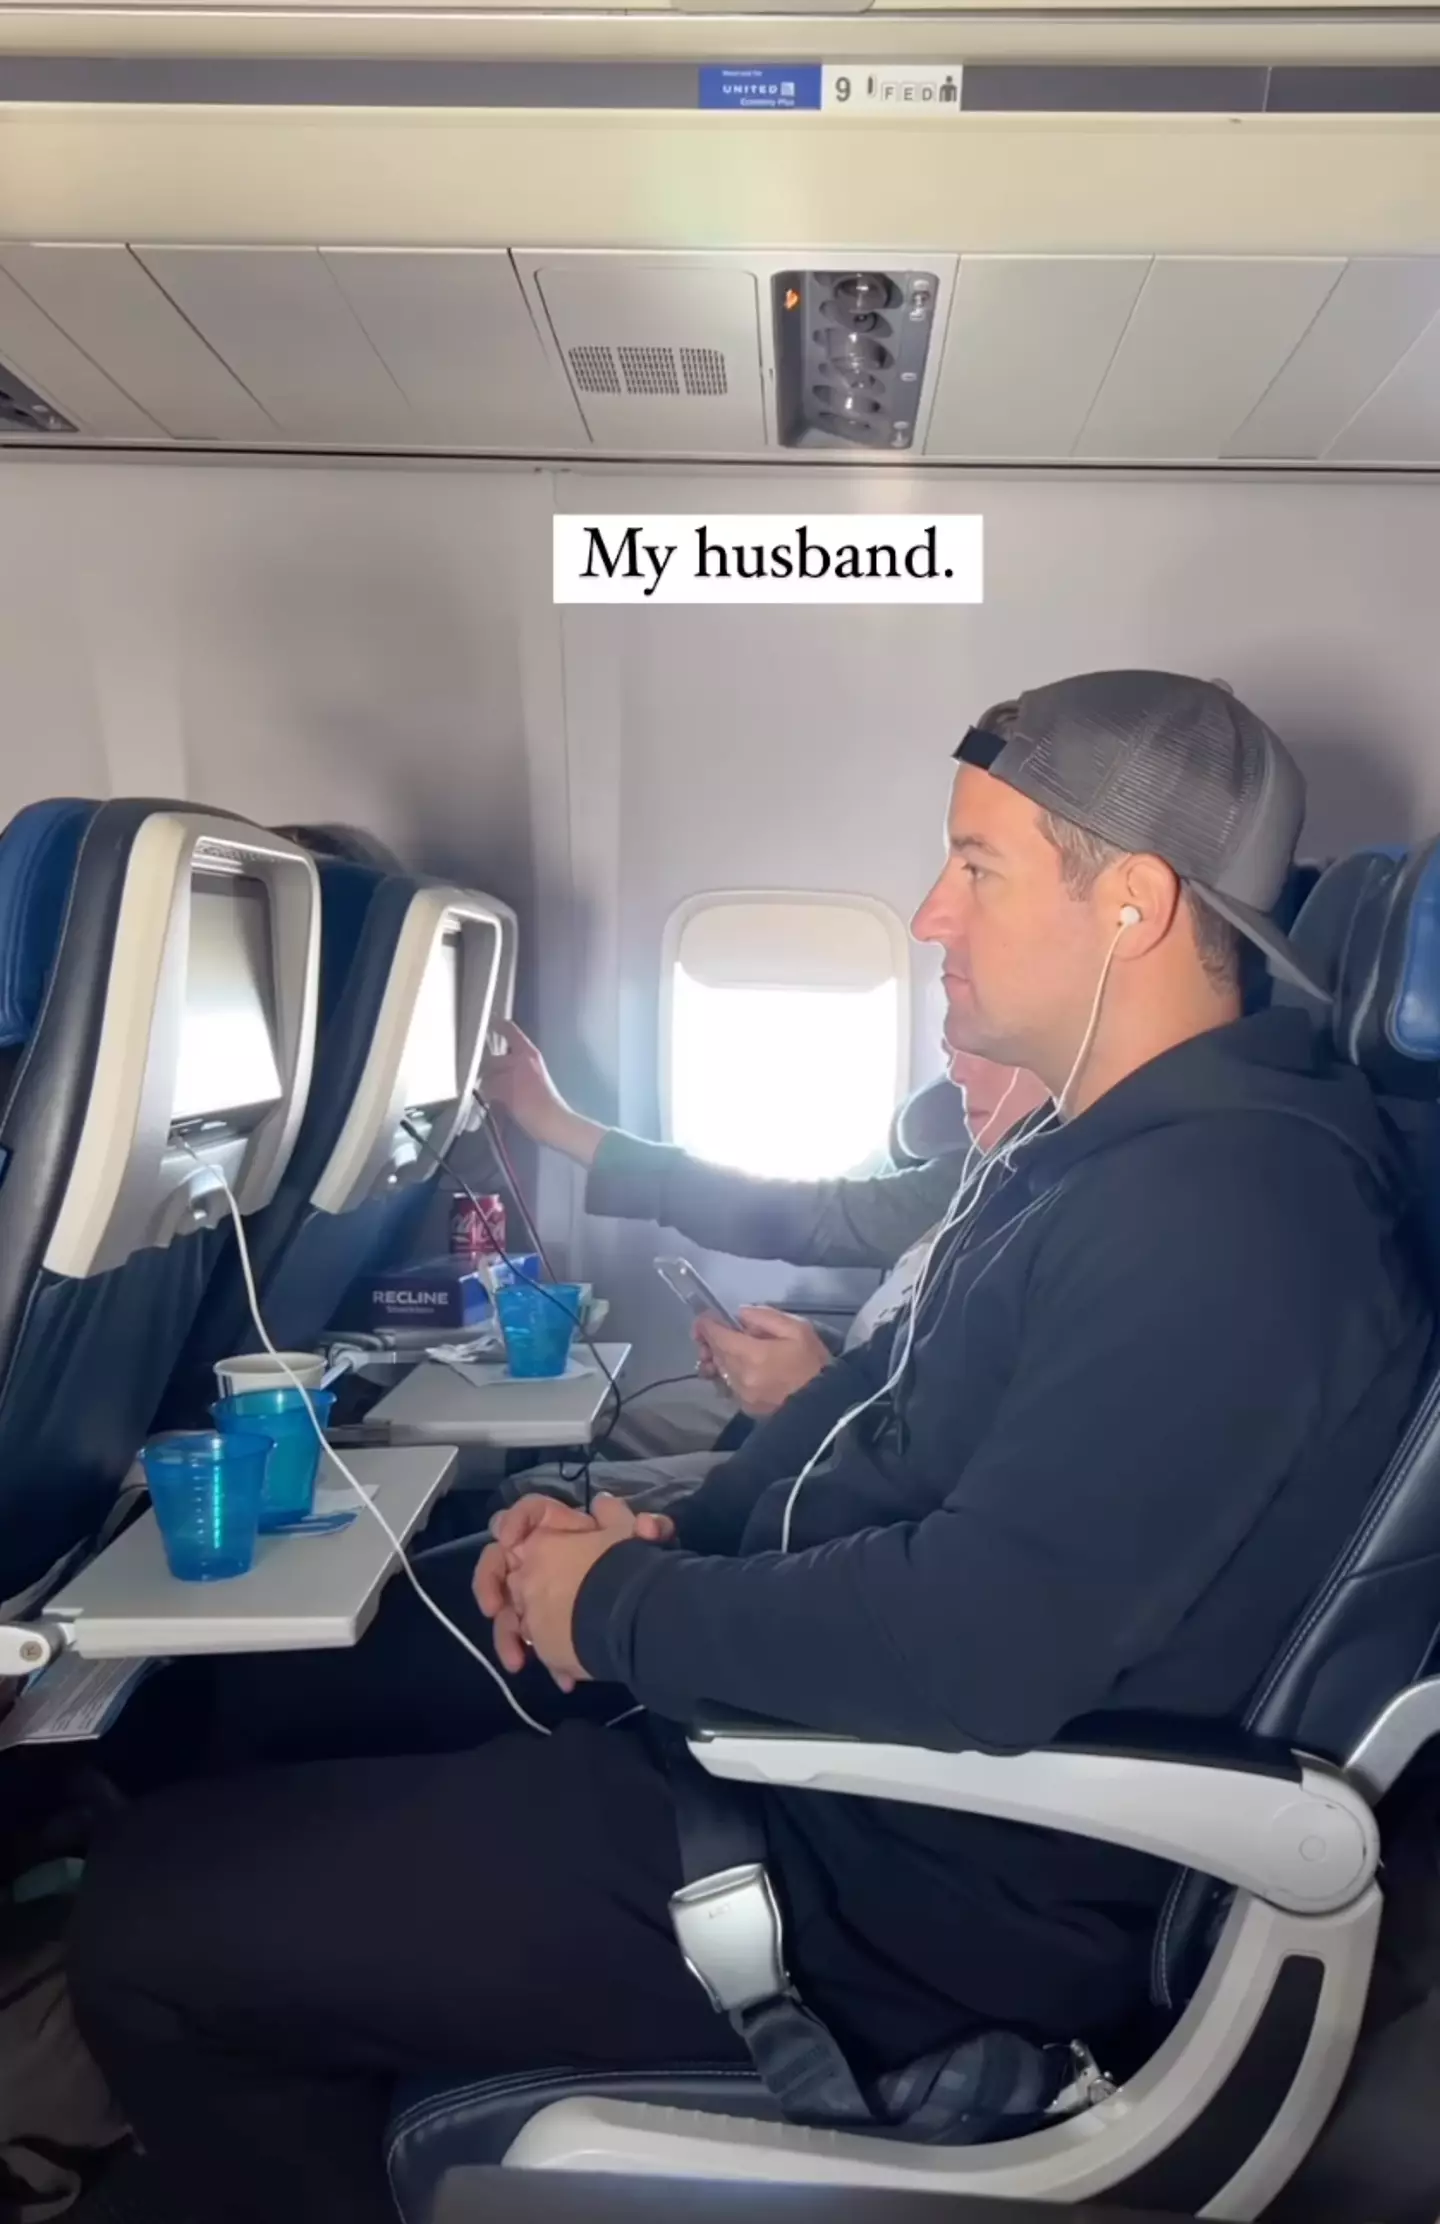 Maria showed a snapshot of her husband's more relaxing flight.